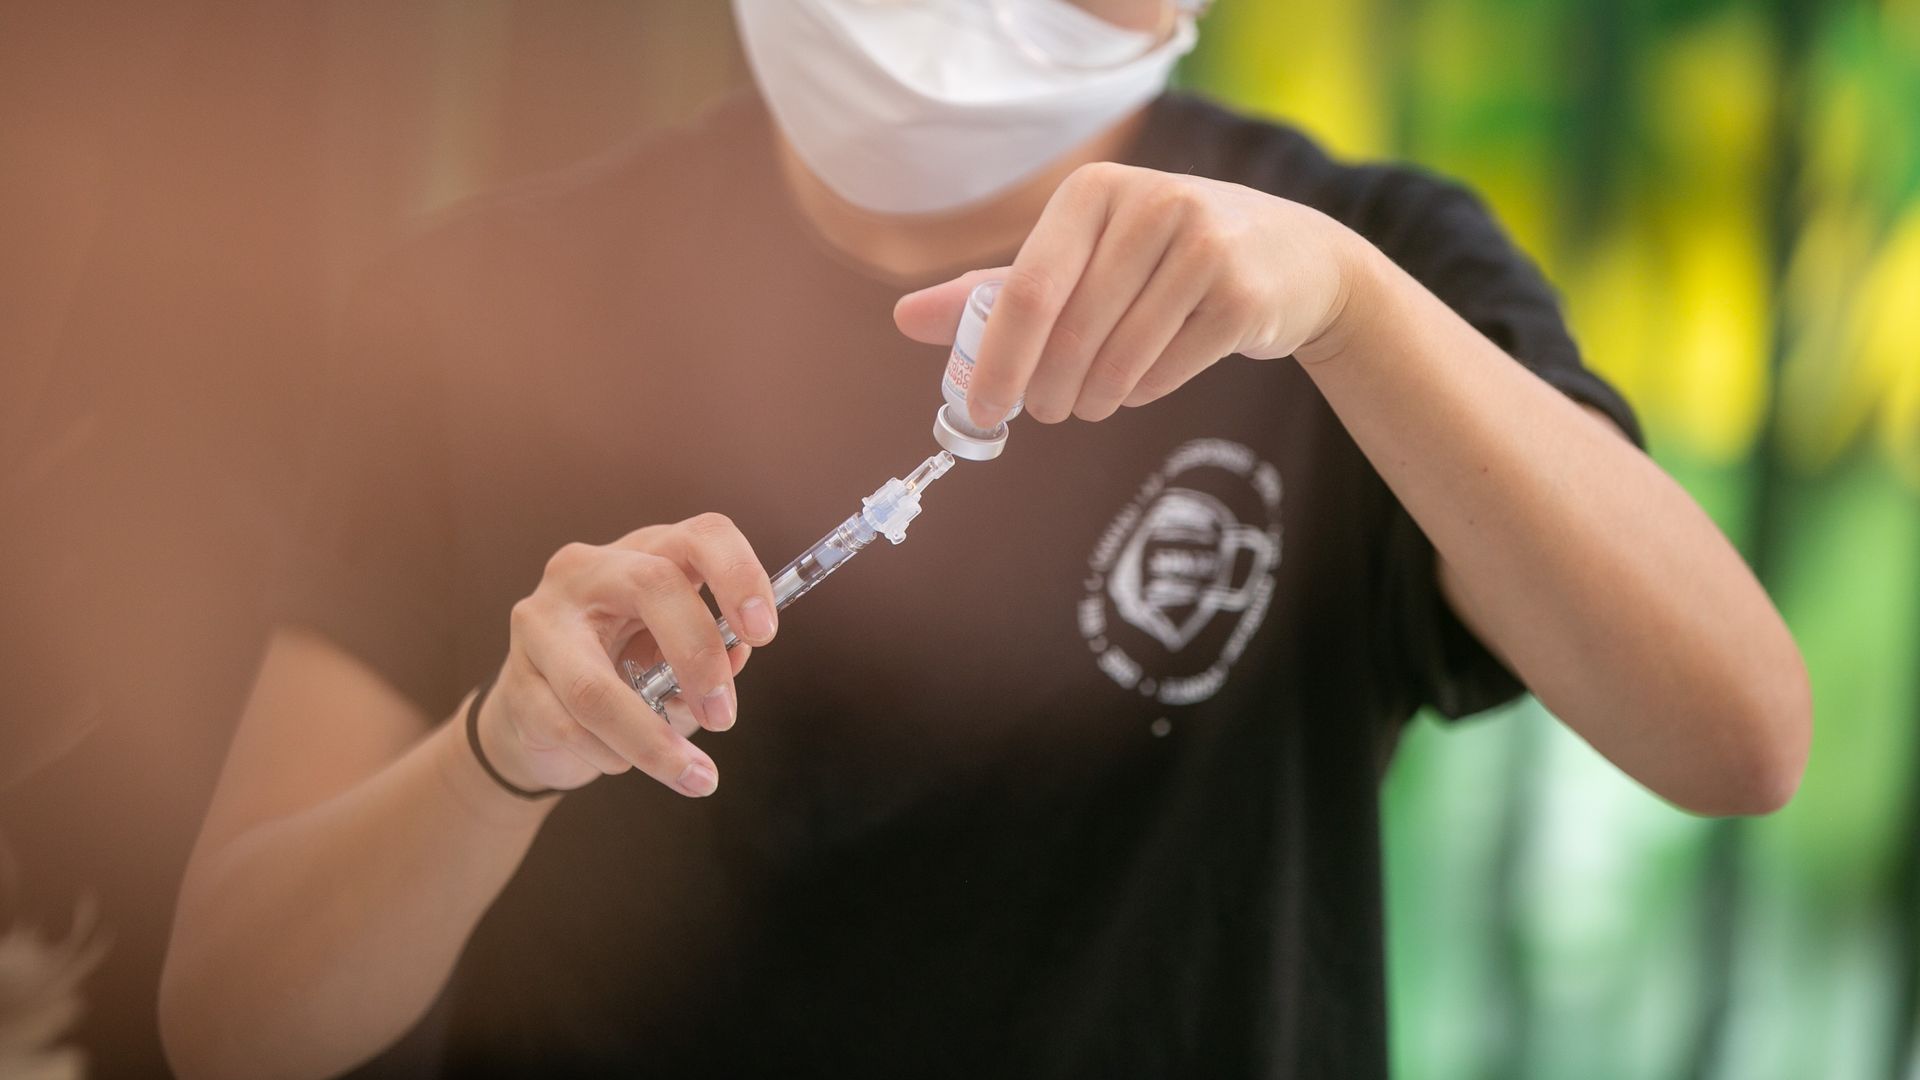 Photo of a masked health care worker holding up a COVID vaccine needle